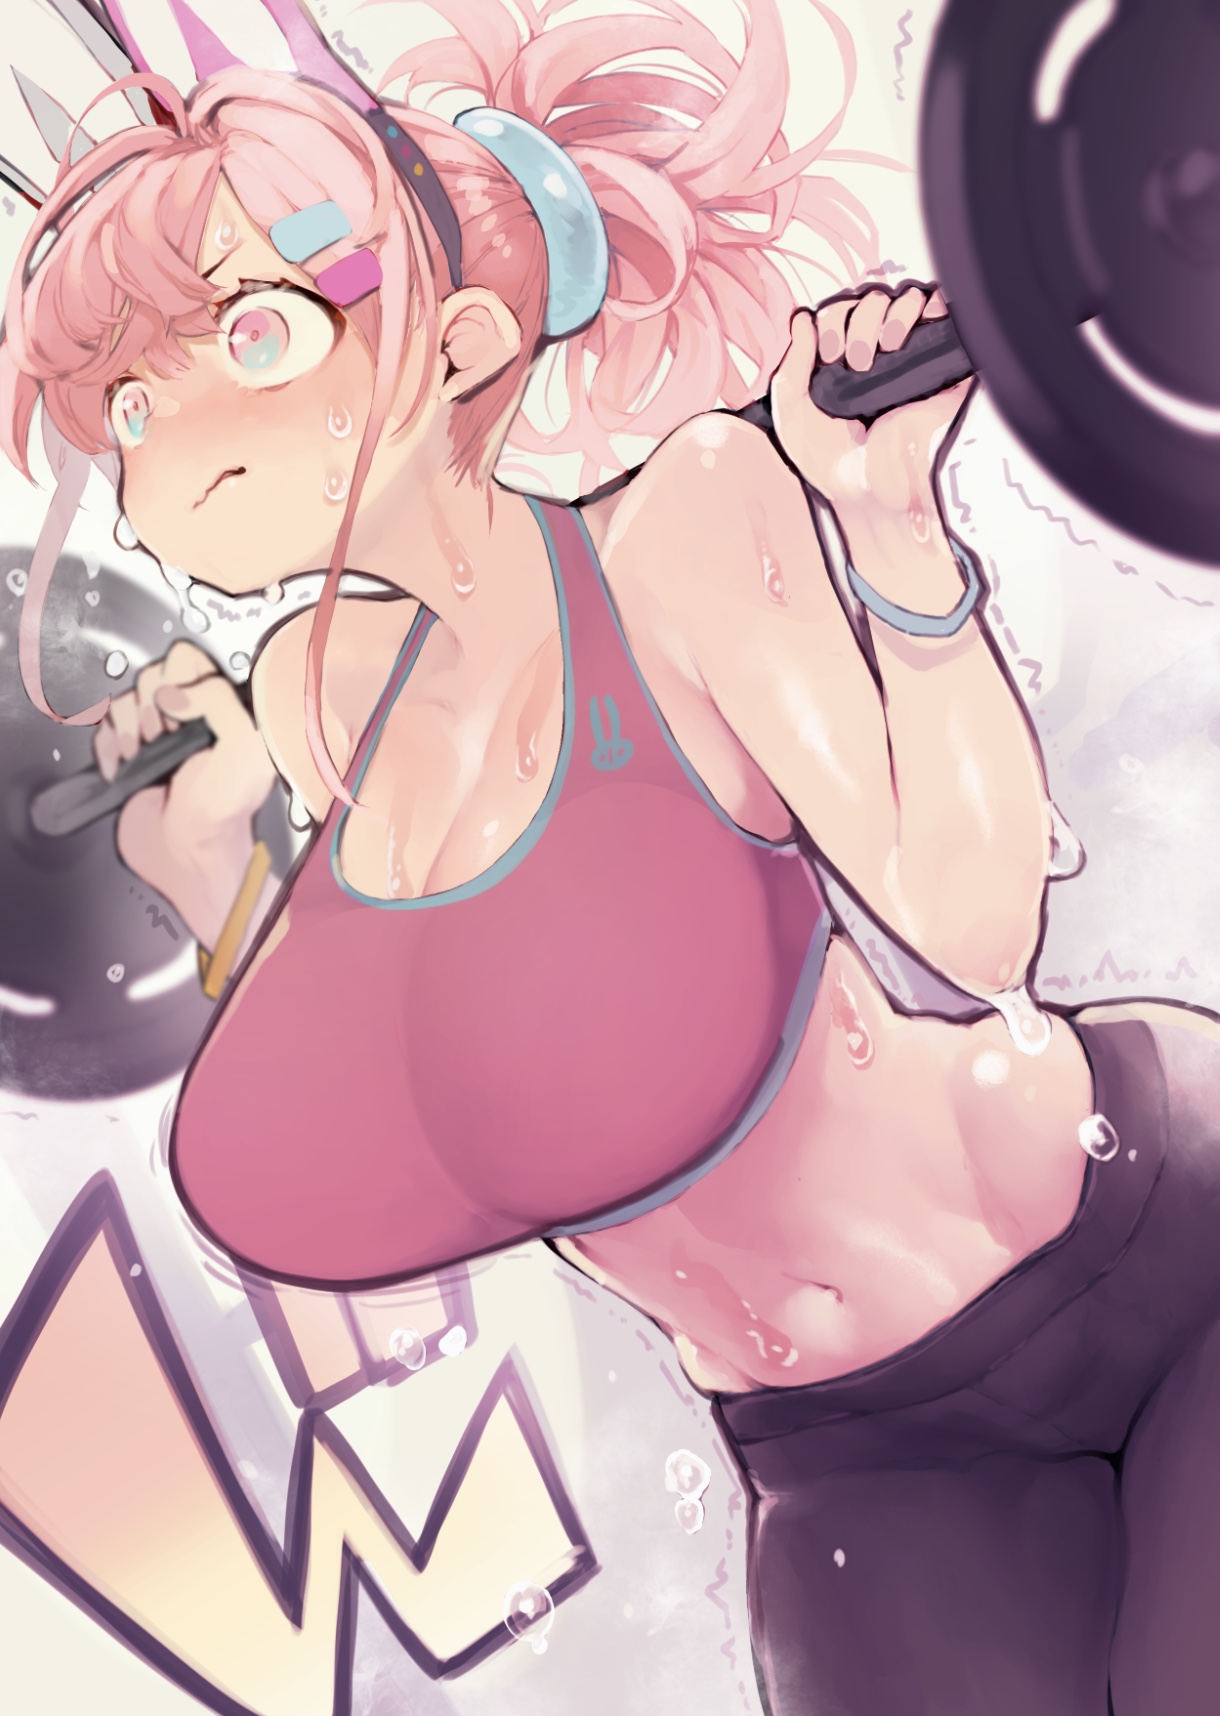 Anime 1220x1716 anime anime girls Hyocoro simple background original characters big boobs cleavage sweating bunny ears pink hair leggings sweaty body sweat sports bra training hairbun blush multi-colored eyes heterochromia weightlifting barbell belly belly button working out exercise sportswear yoga pants